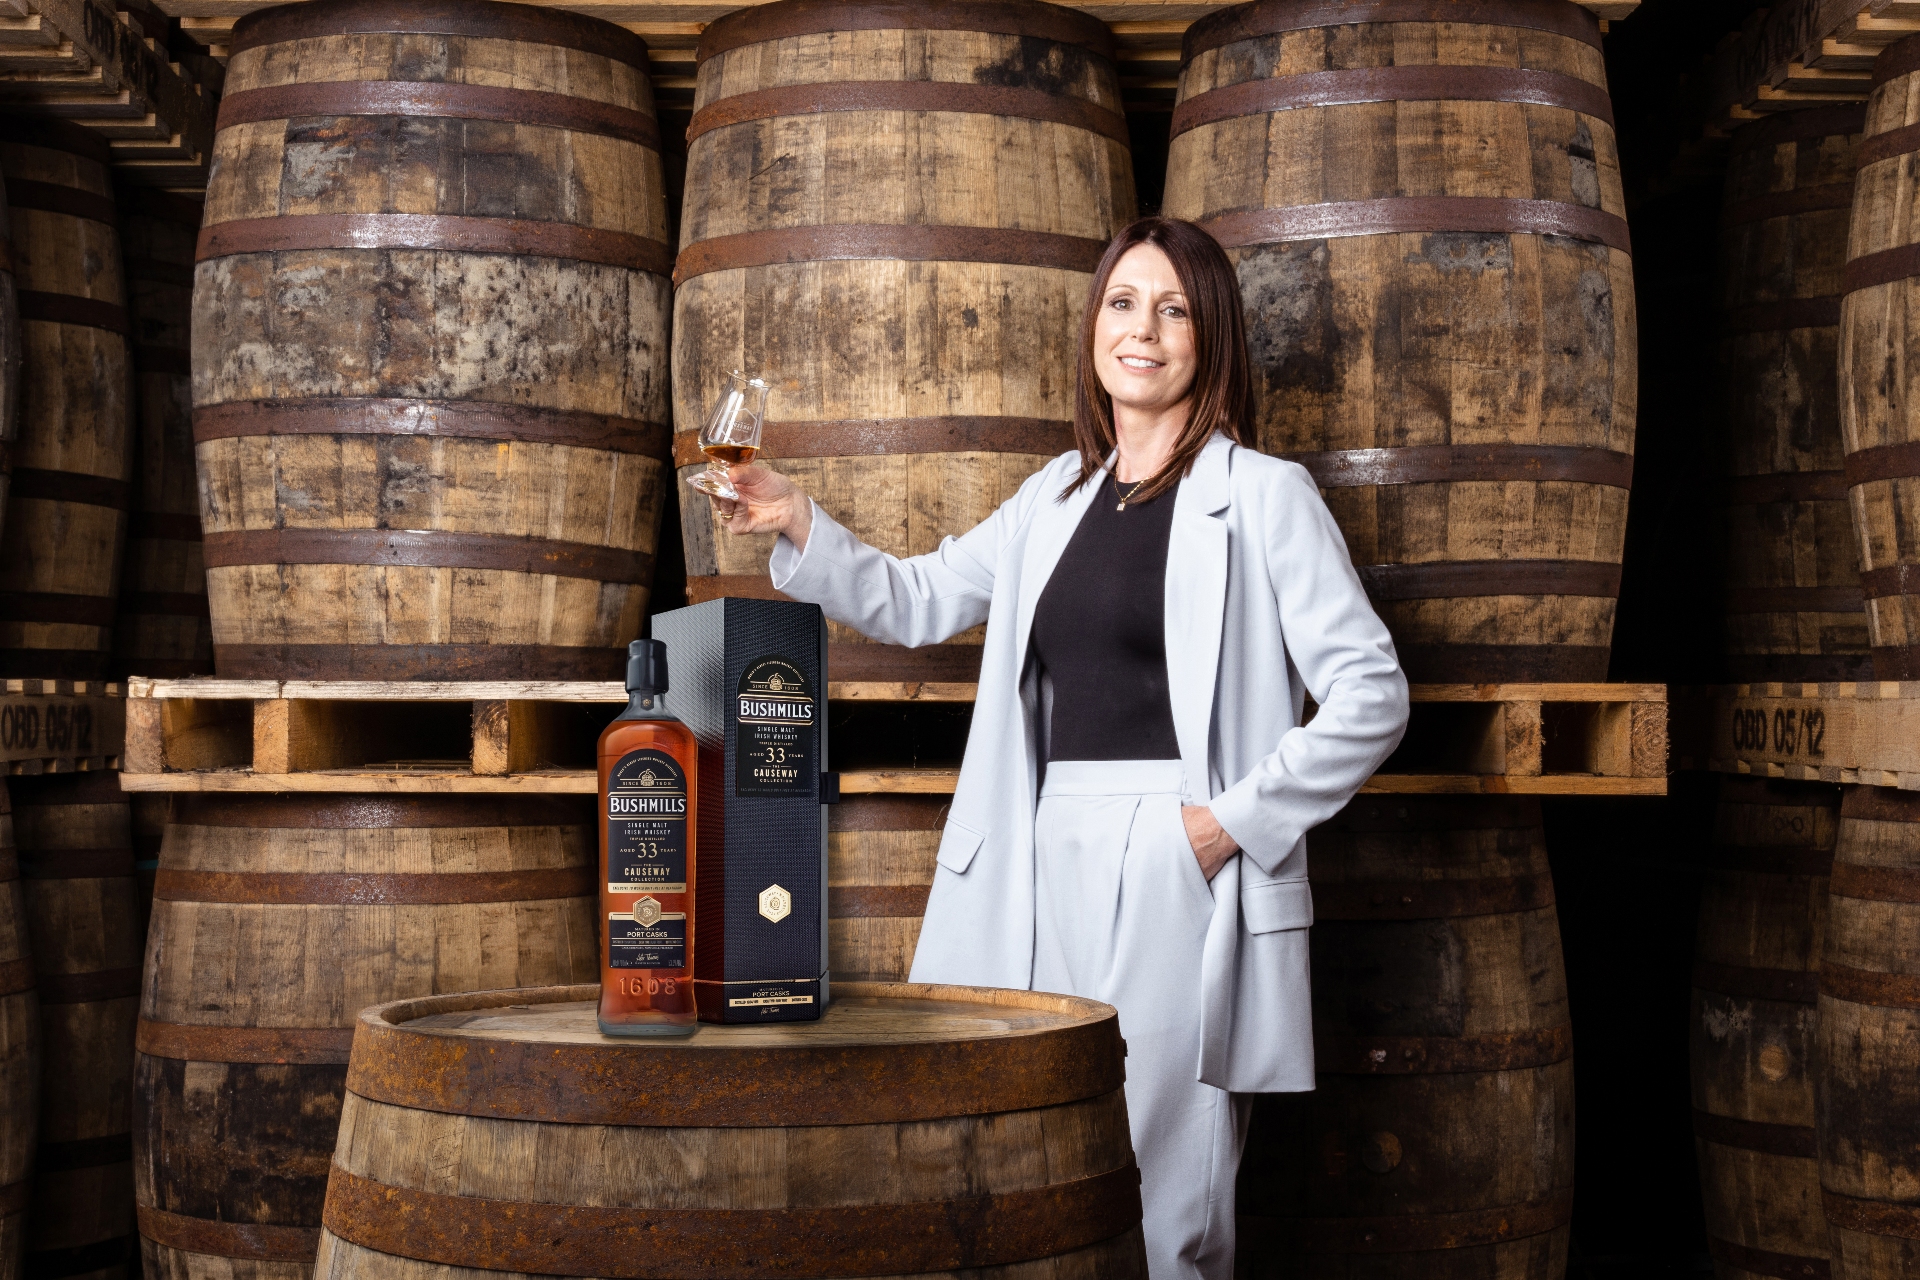 Bushmills 33-year-old Port Cask a very rare treat